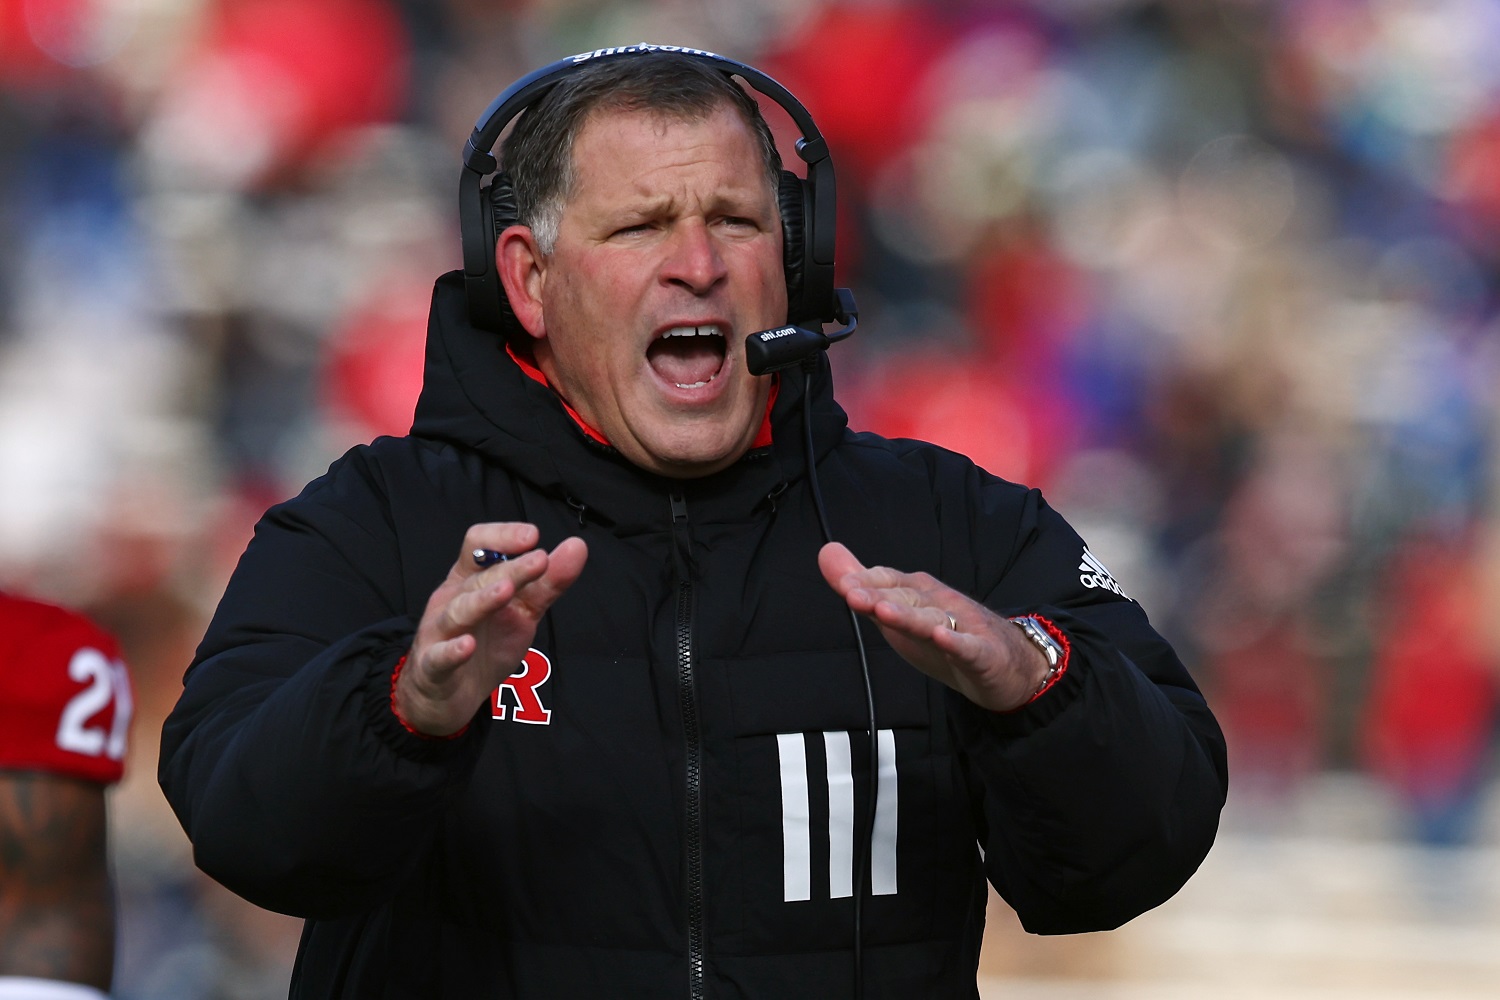 Coach Greg Schiano of the Rutgers Scarlet Knights gestures during the third quarter of a football game against the Maryland Terrapins at SHI Stadium on Nov. 27, 2021.